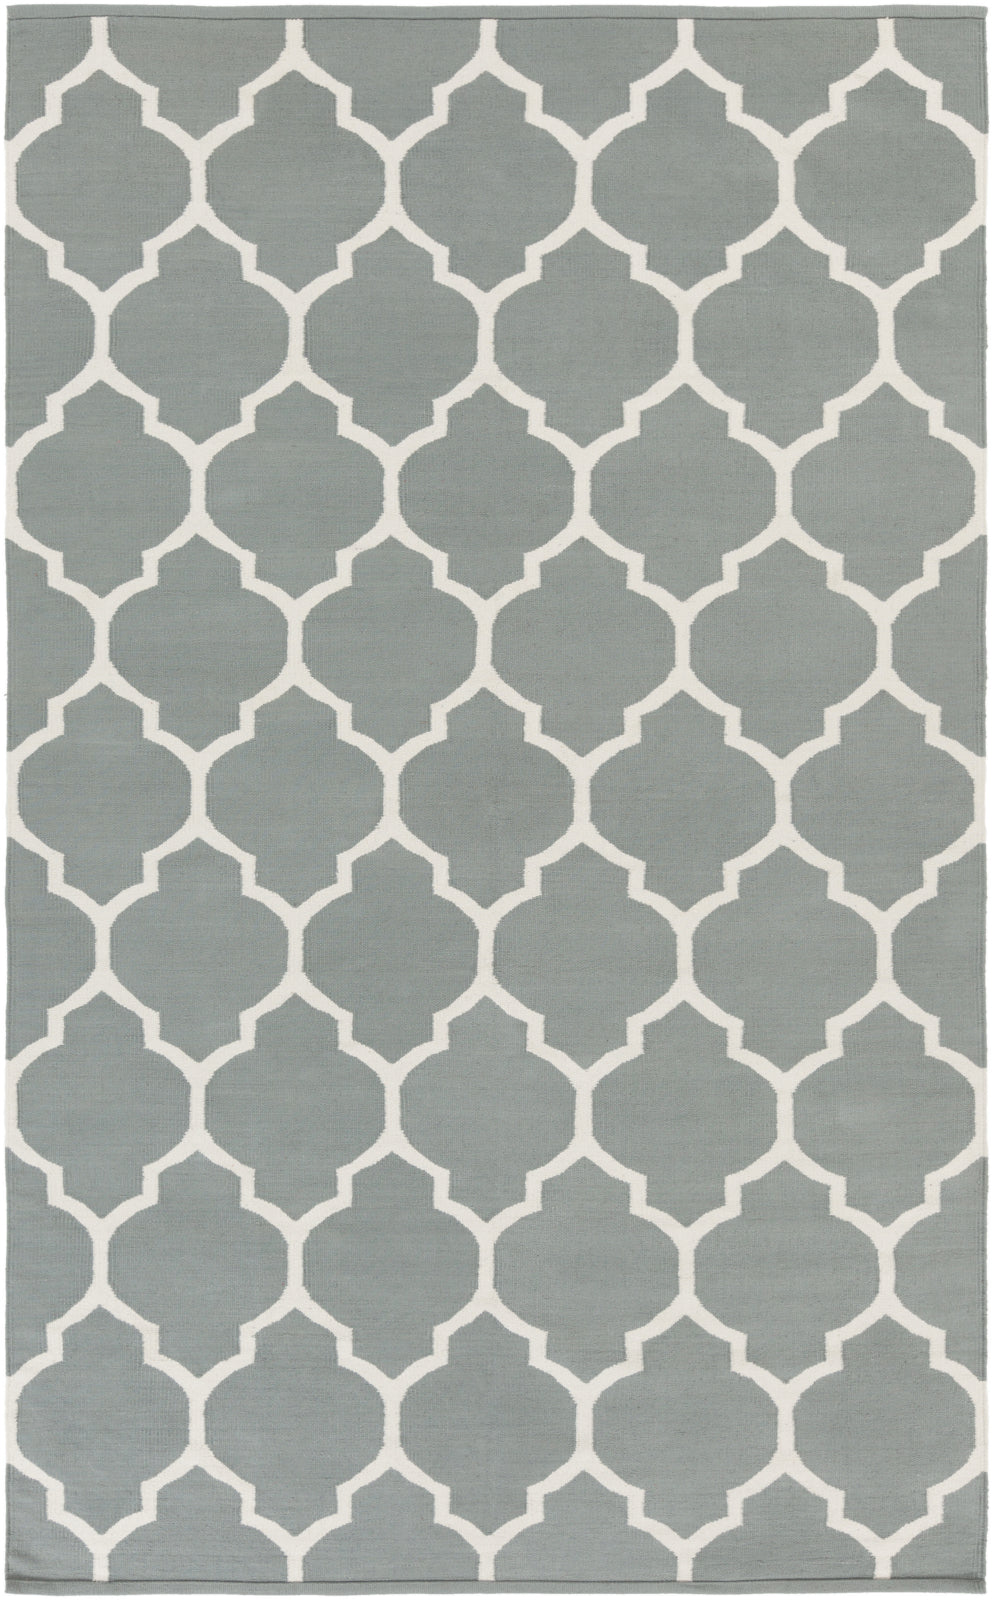 Artistic Weavers Vogue Claire AWLT3012 Area Rug main image